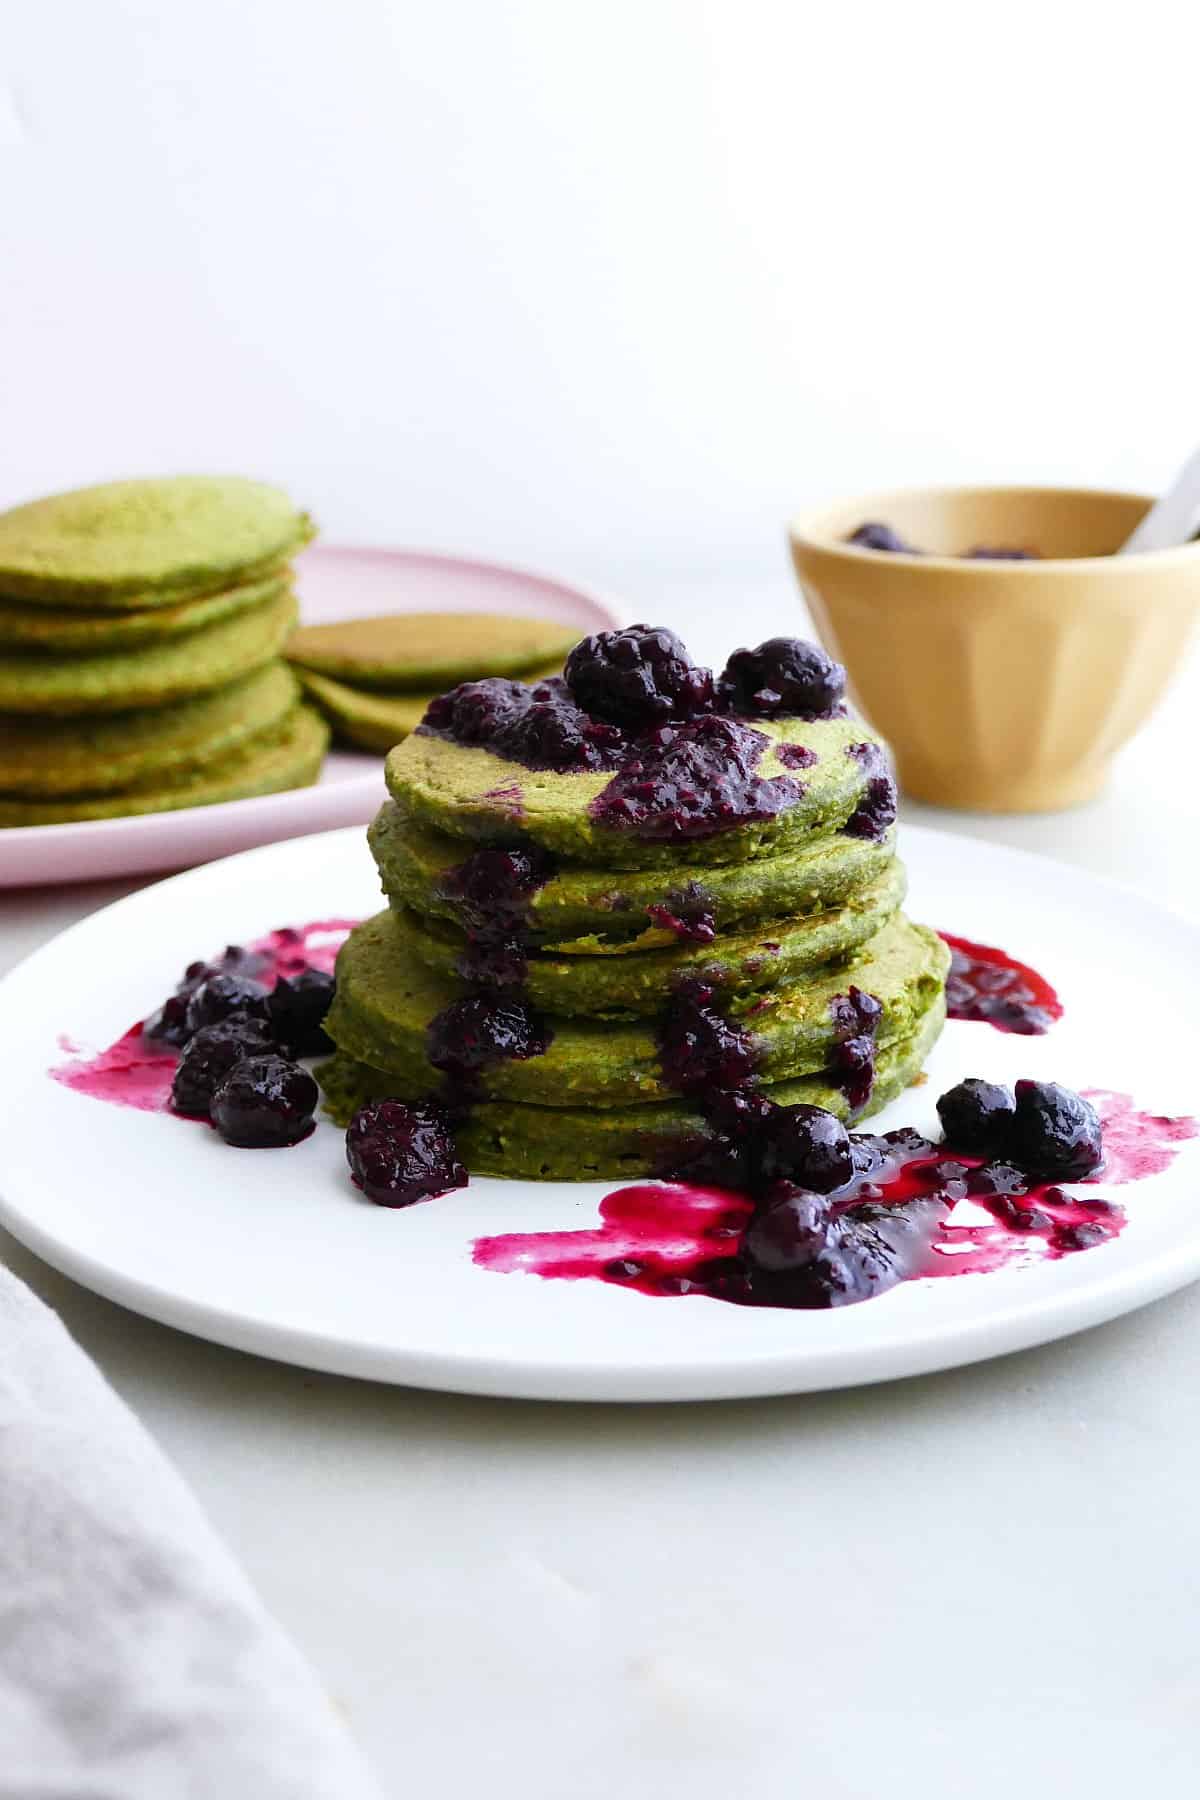 spinach pancakes with berry compote on a plate in front of more pancakes